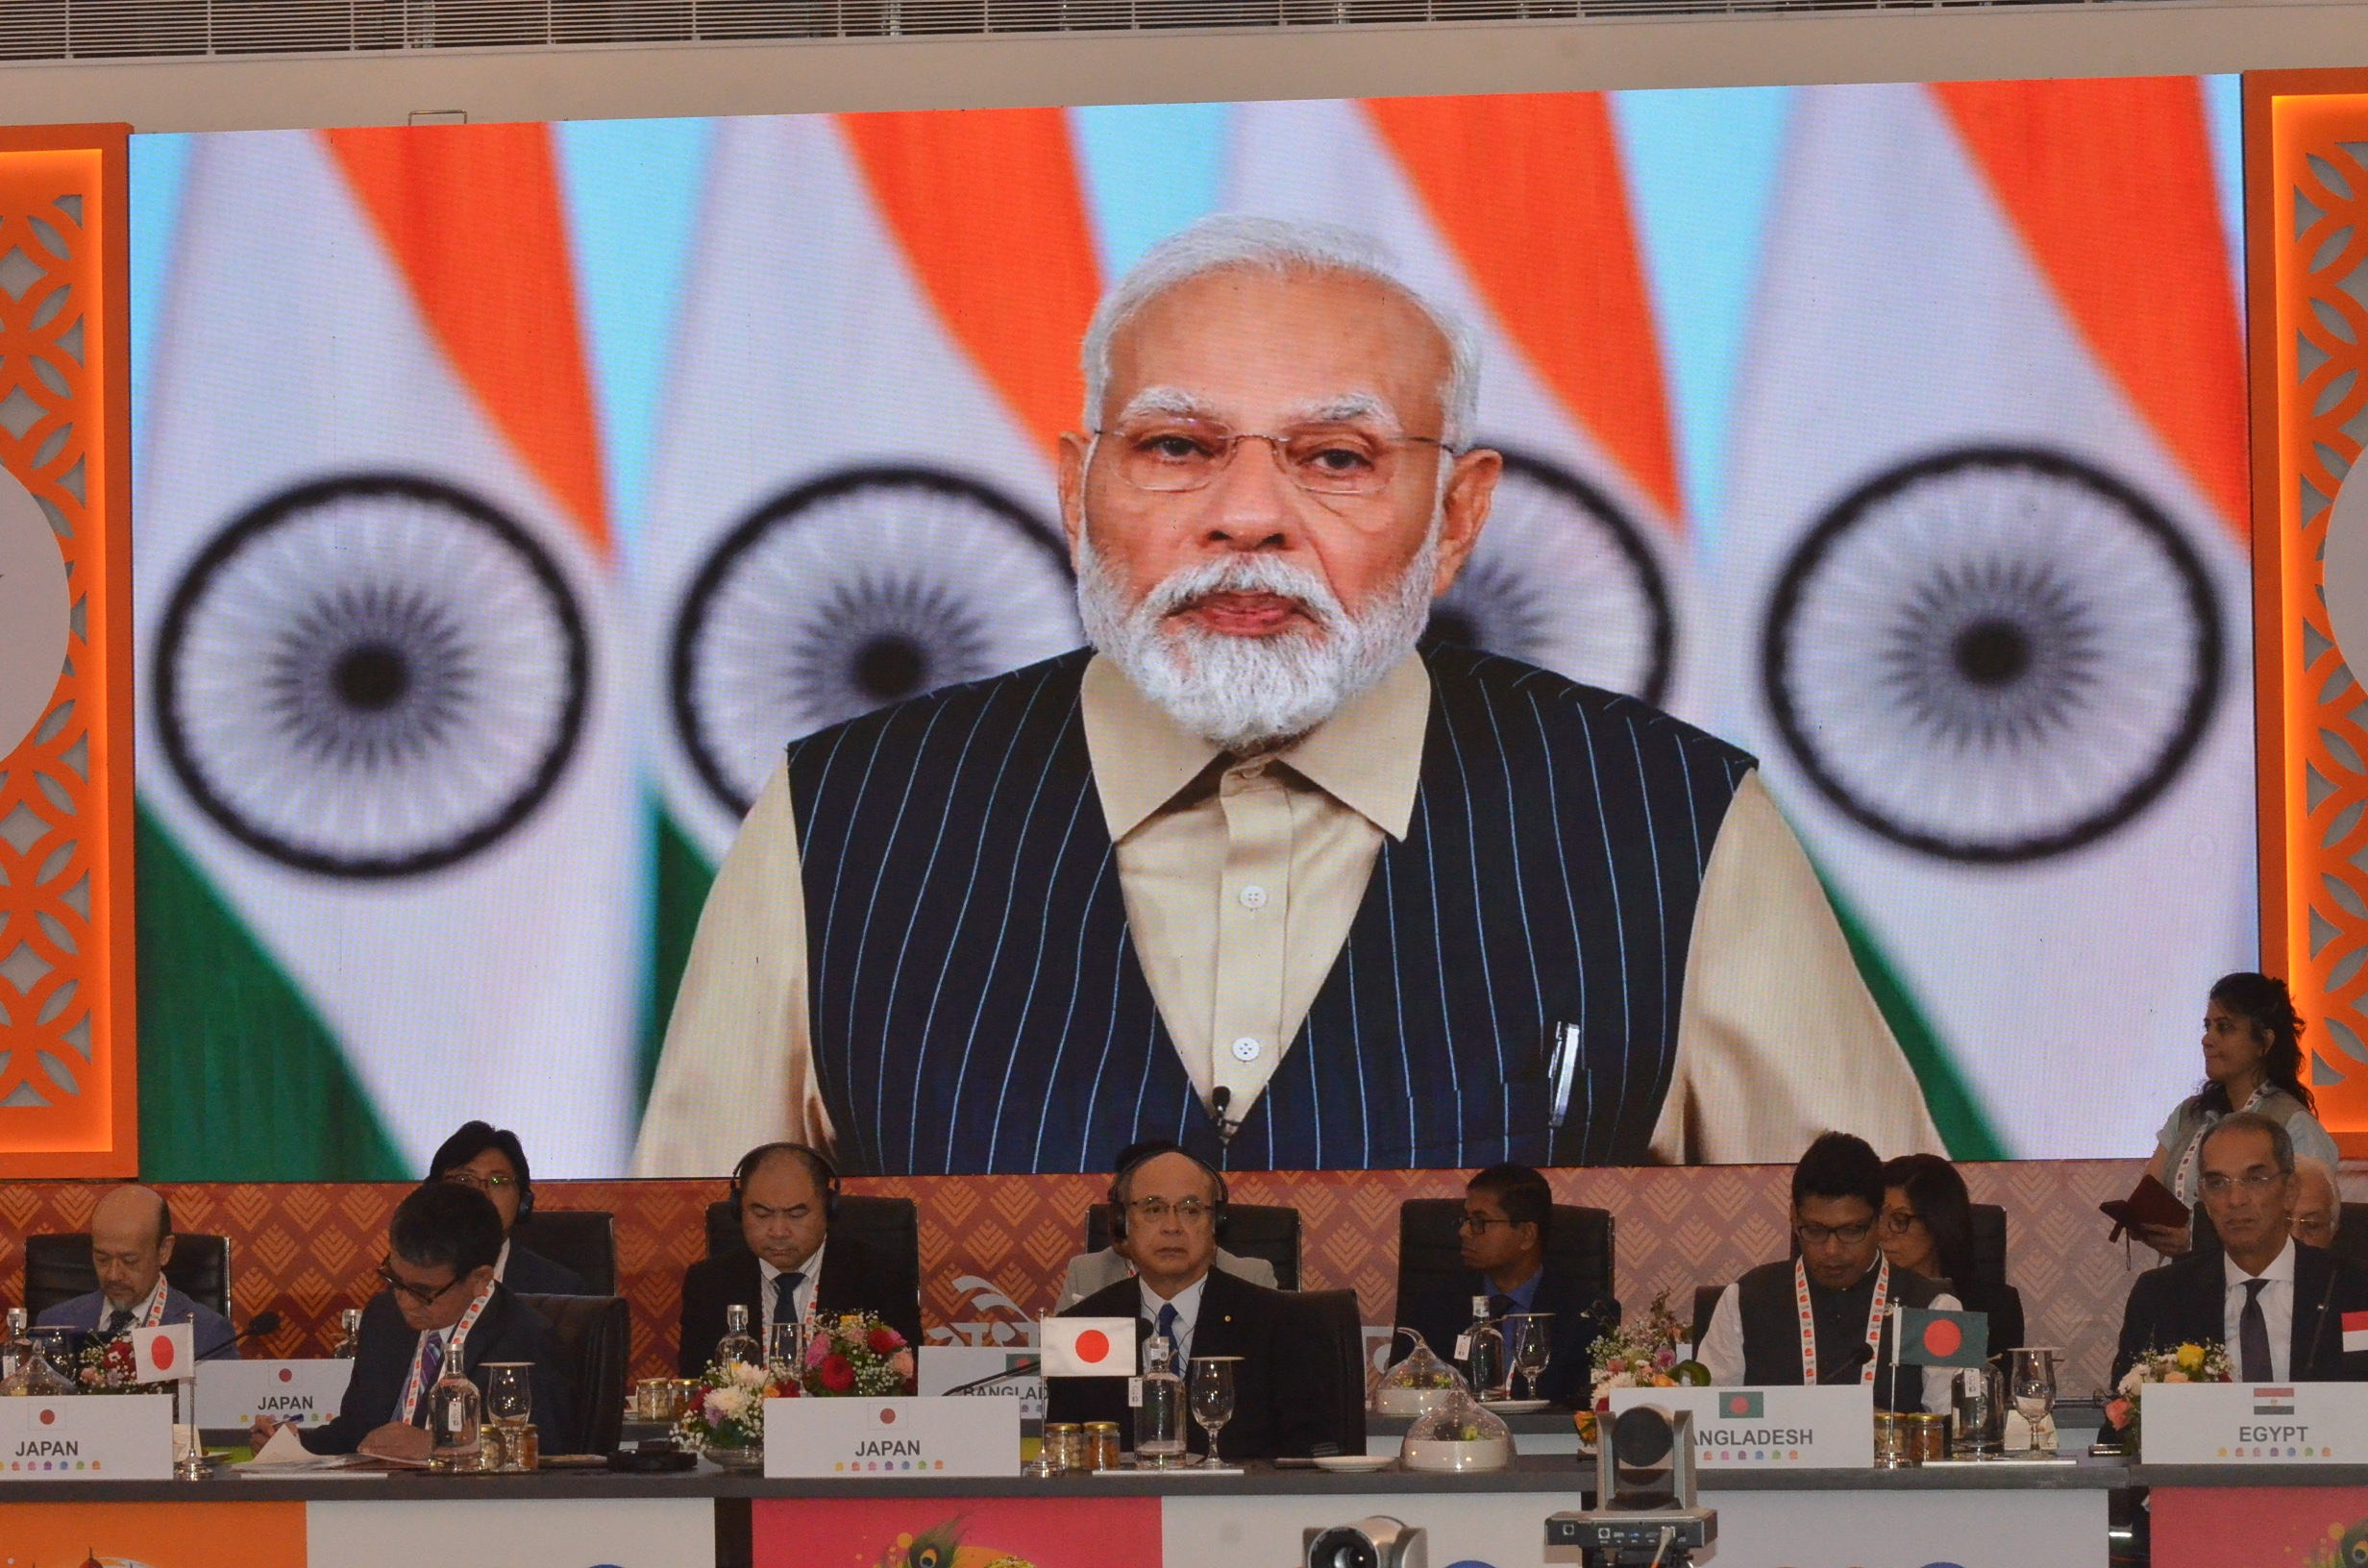 The India's Prime Minister Modi appears on the screen during the meeting.